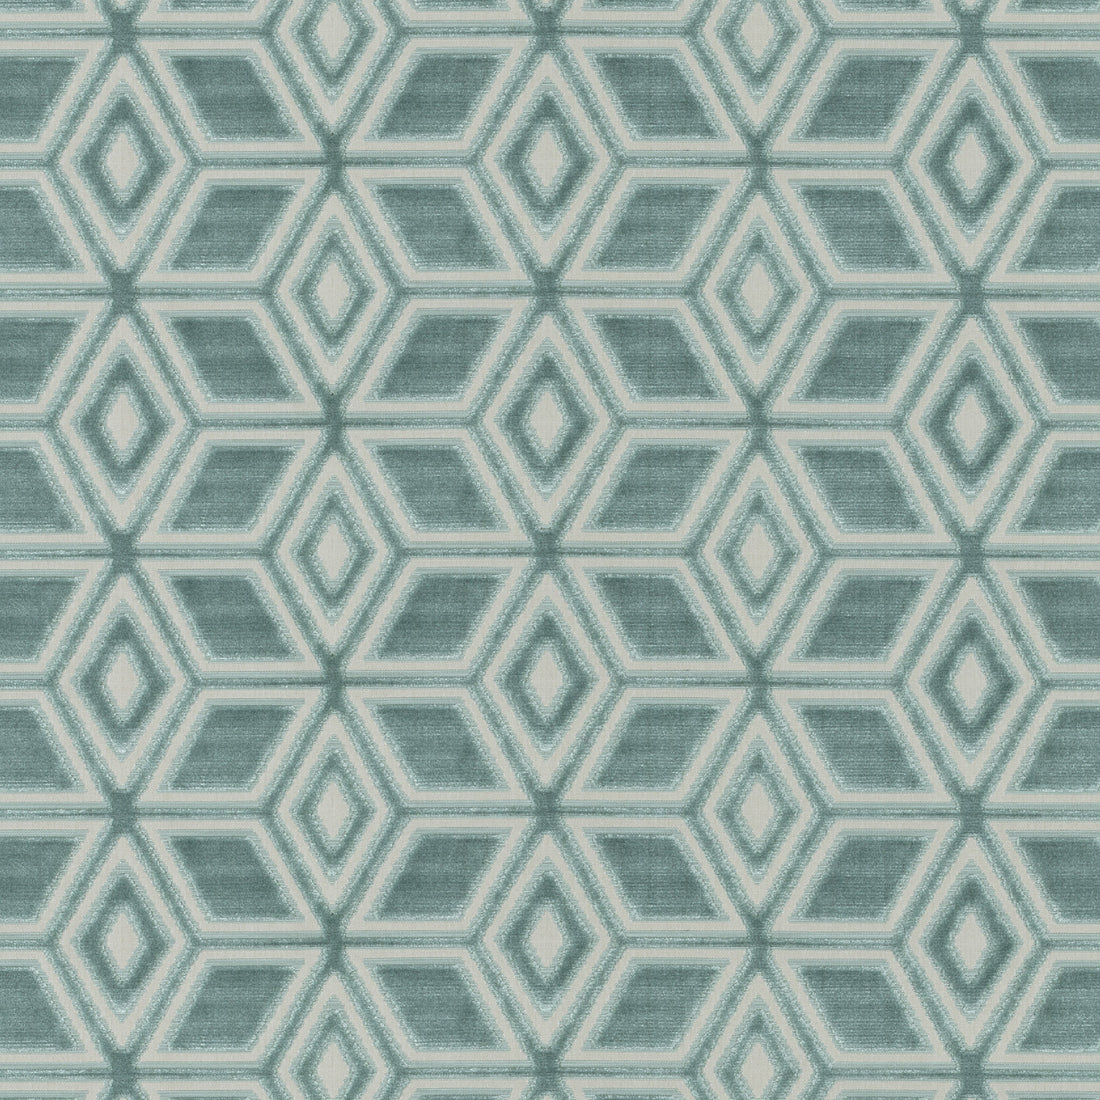 Jardin Maze fabric in aqua color - pattern number AW72983 - by Anna French in the Manor collection